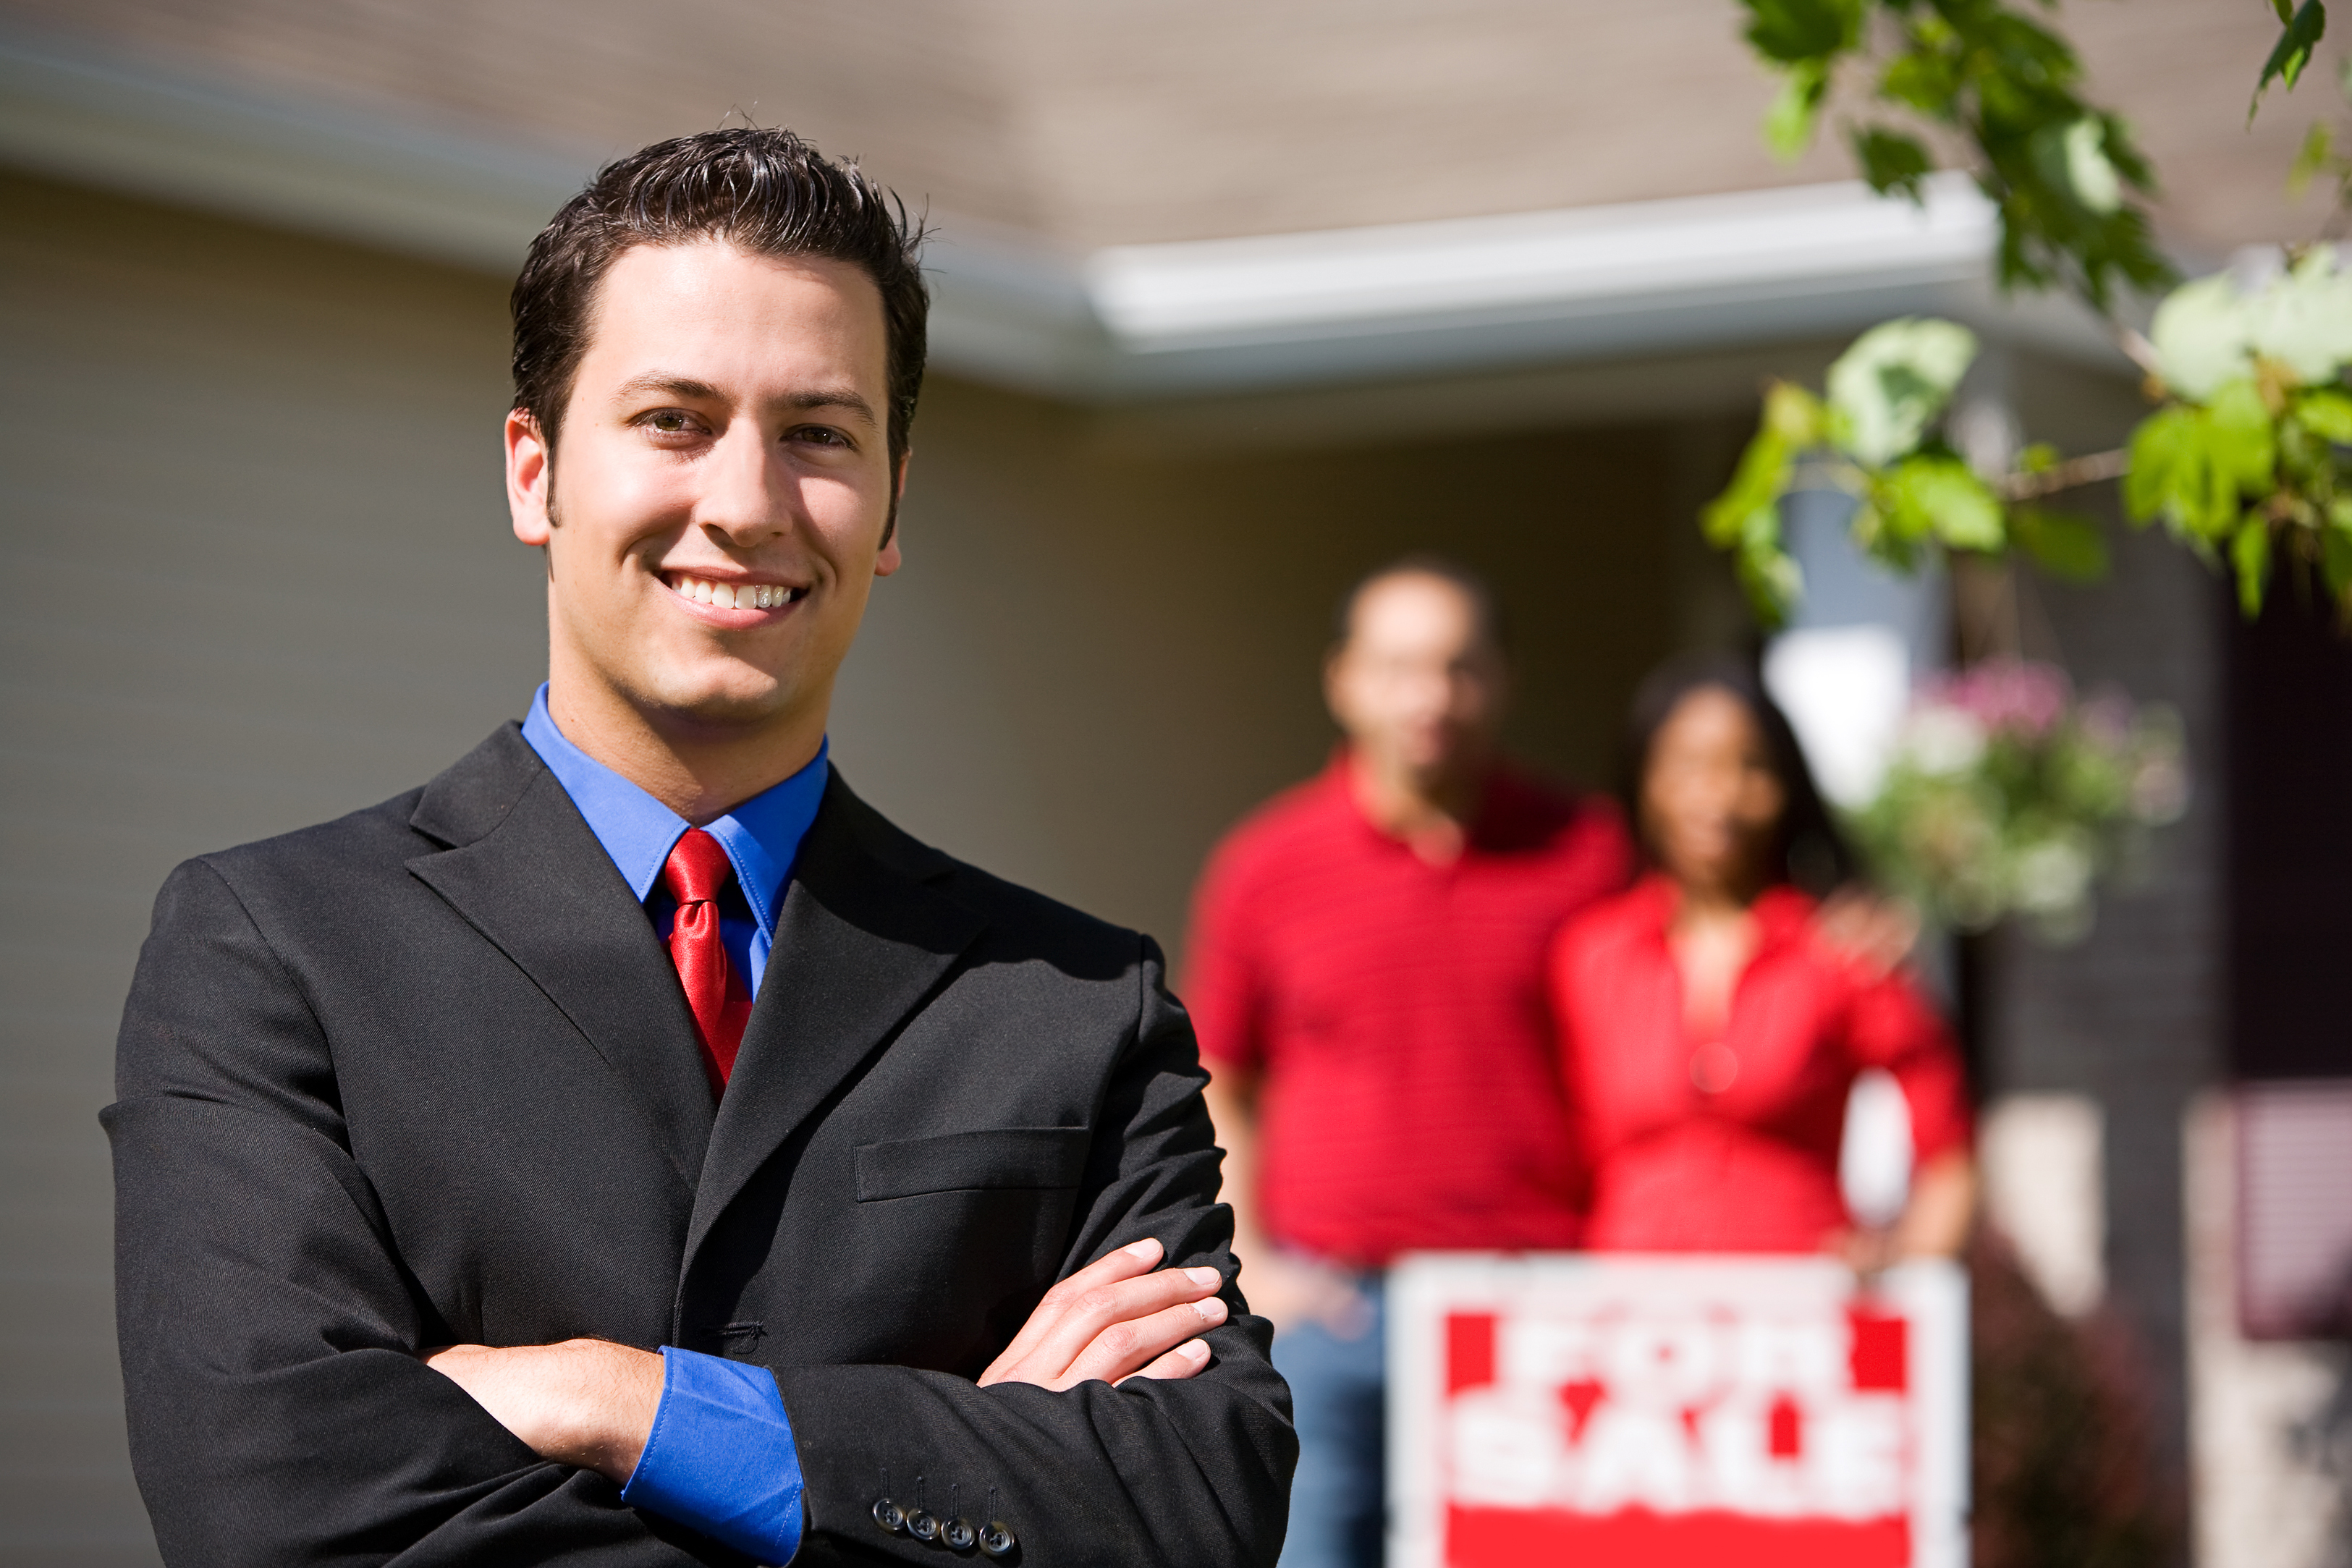 What Clients want in a Real Estate Agent